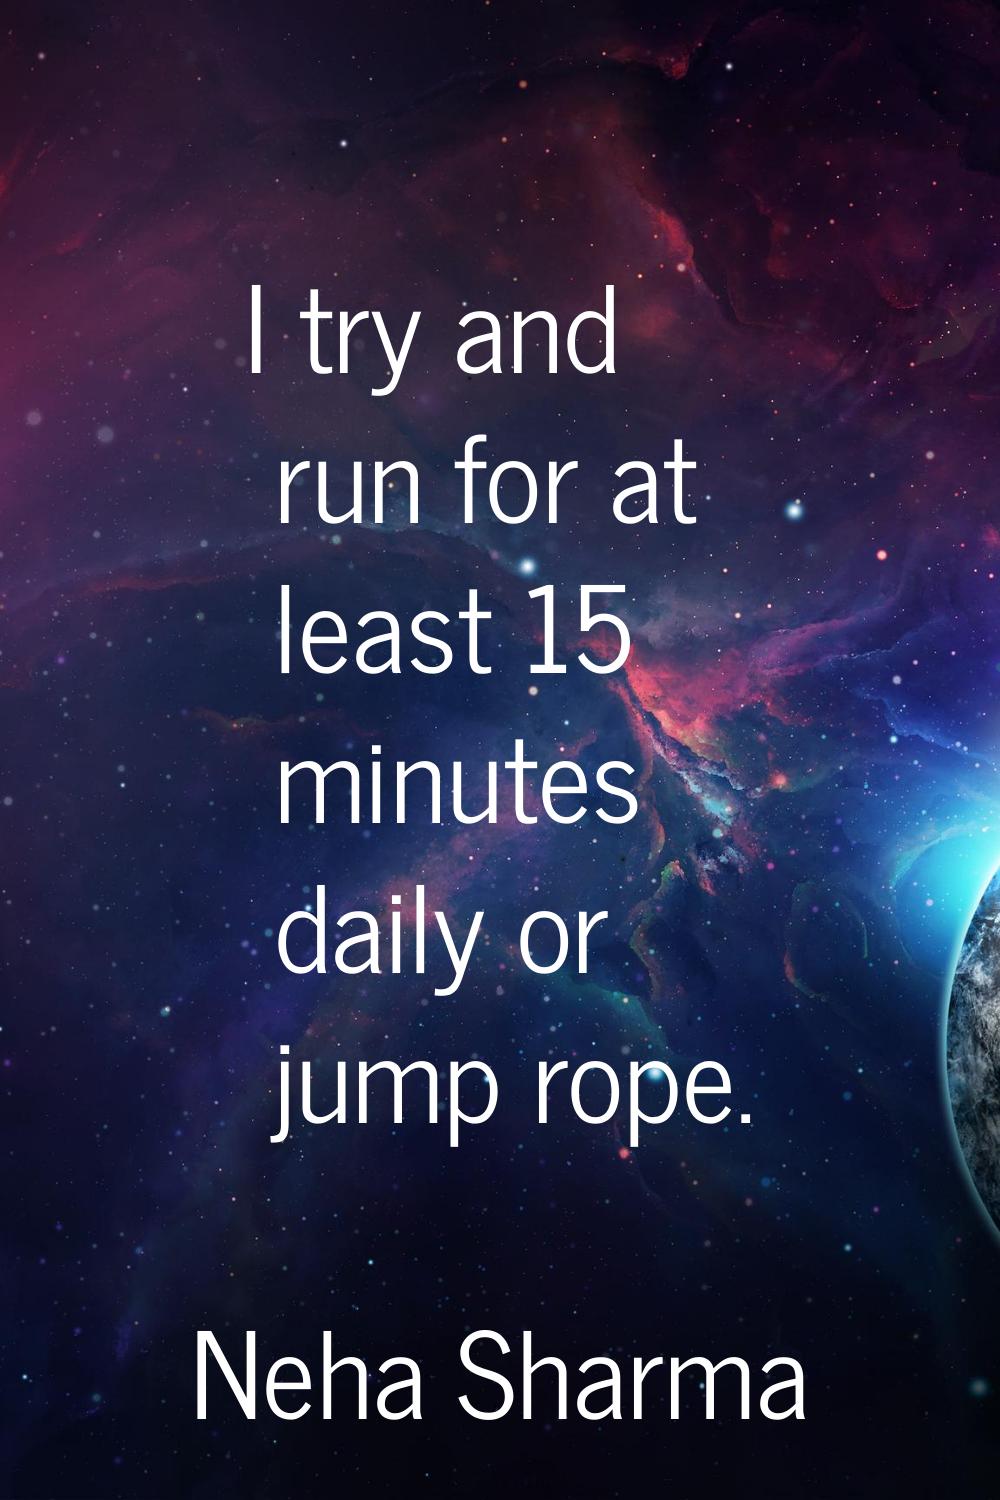 I try and run for at least 15 minutes daily or jump rope.